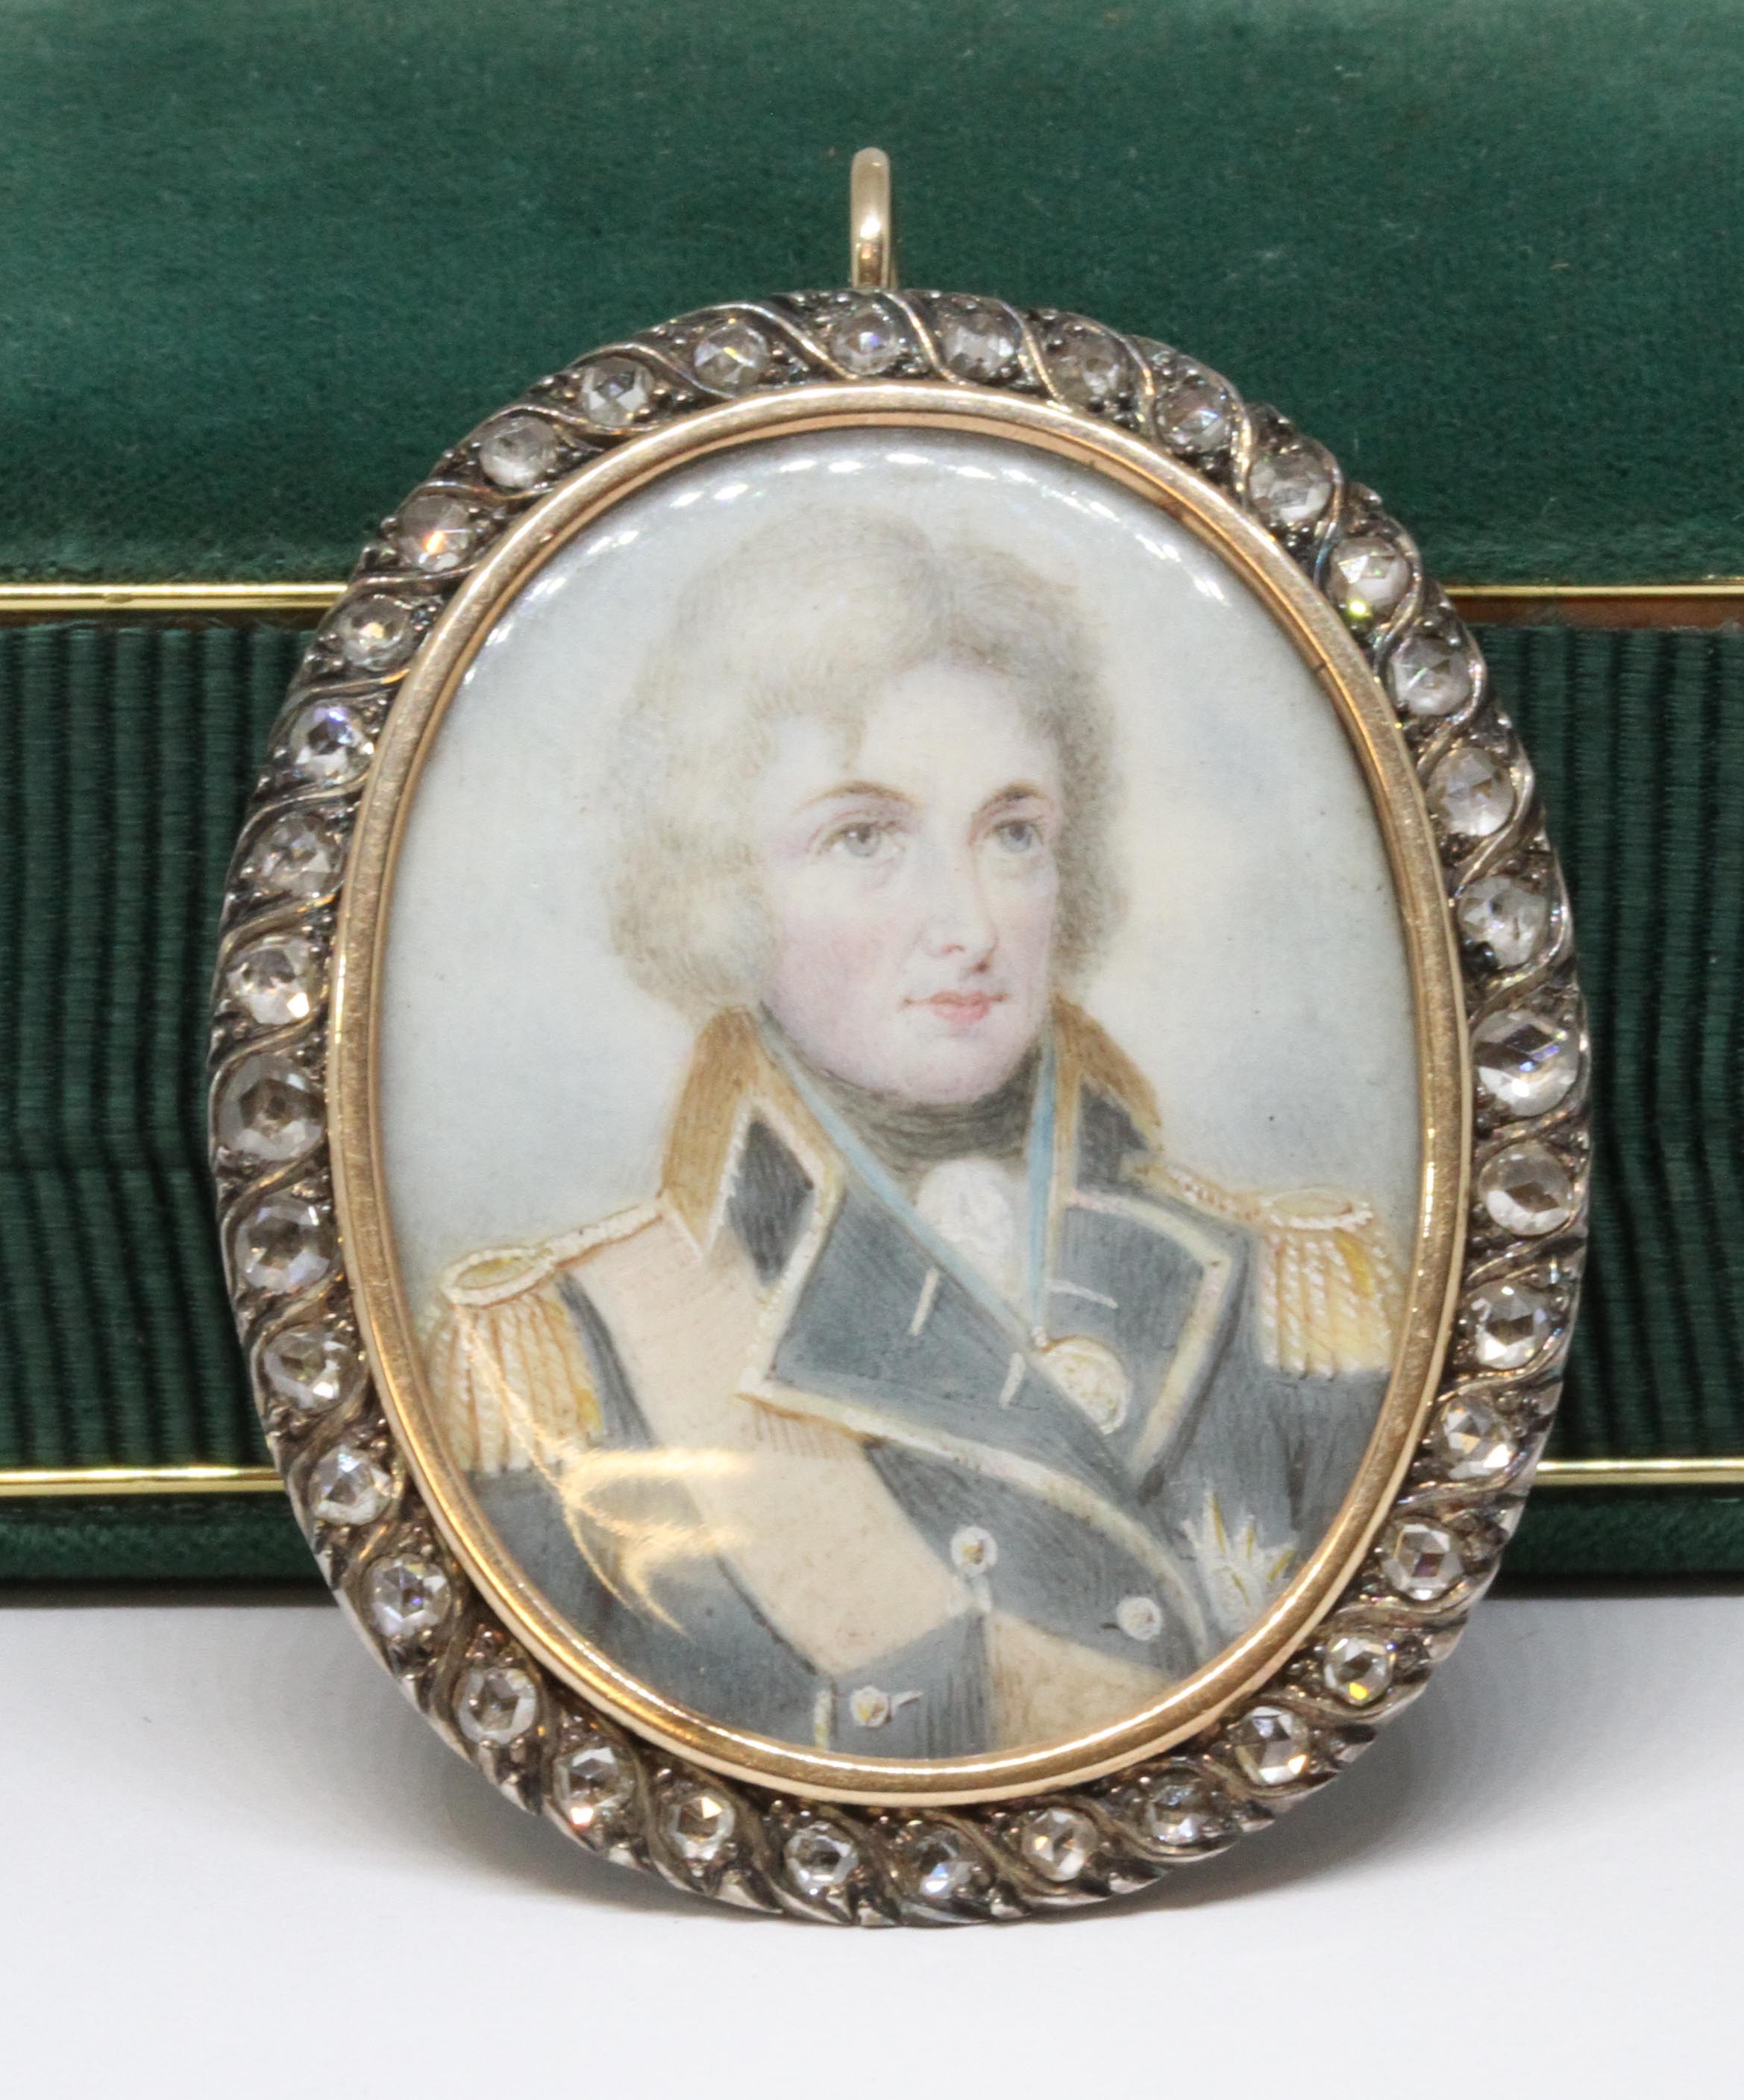 A late 18th century portrait miniature on ivory, circa 1790, depicting Lord Nelson, surrounded by